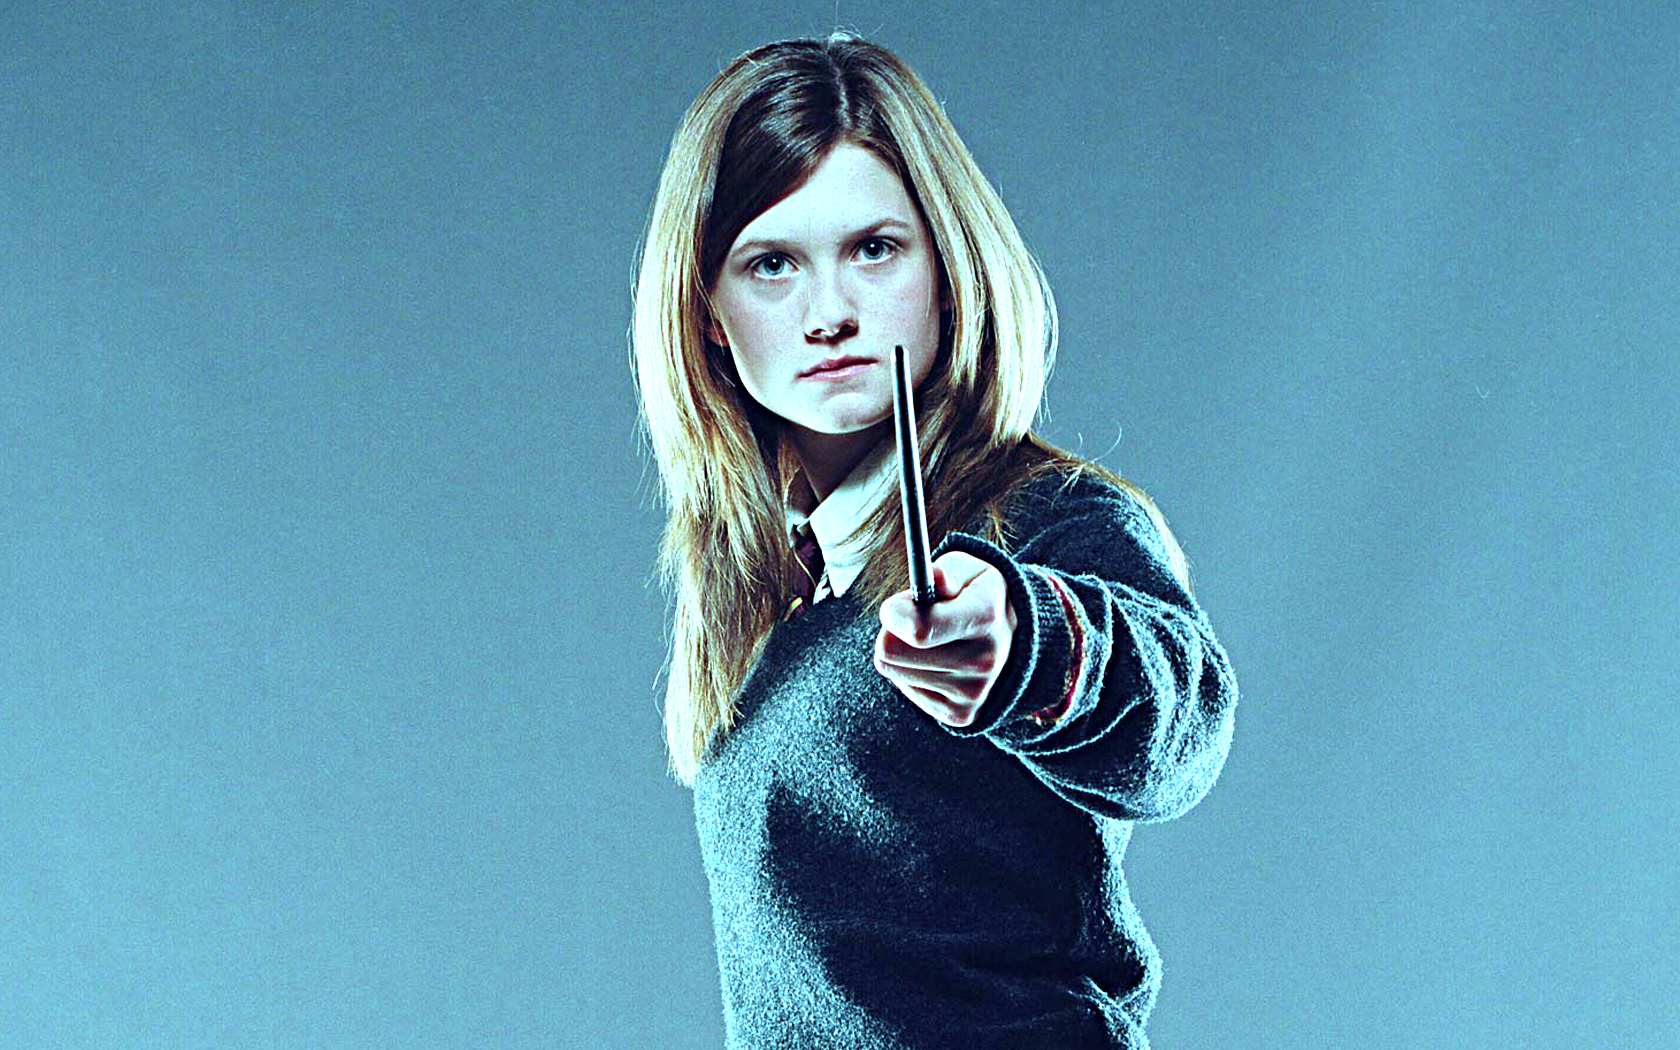 HD Wallpaper Source Bonnie Wright You Can